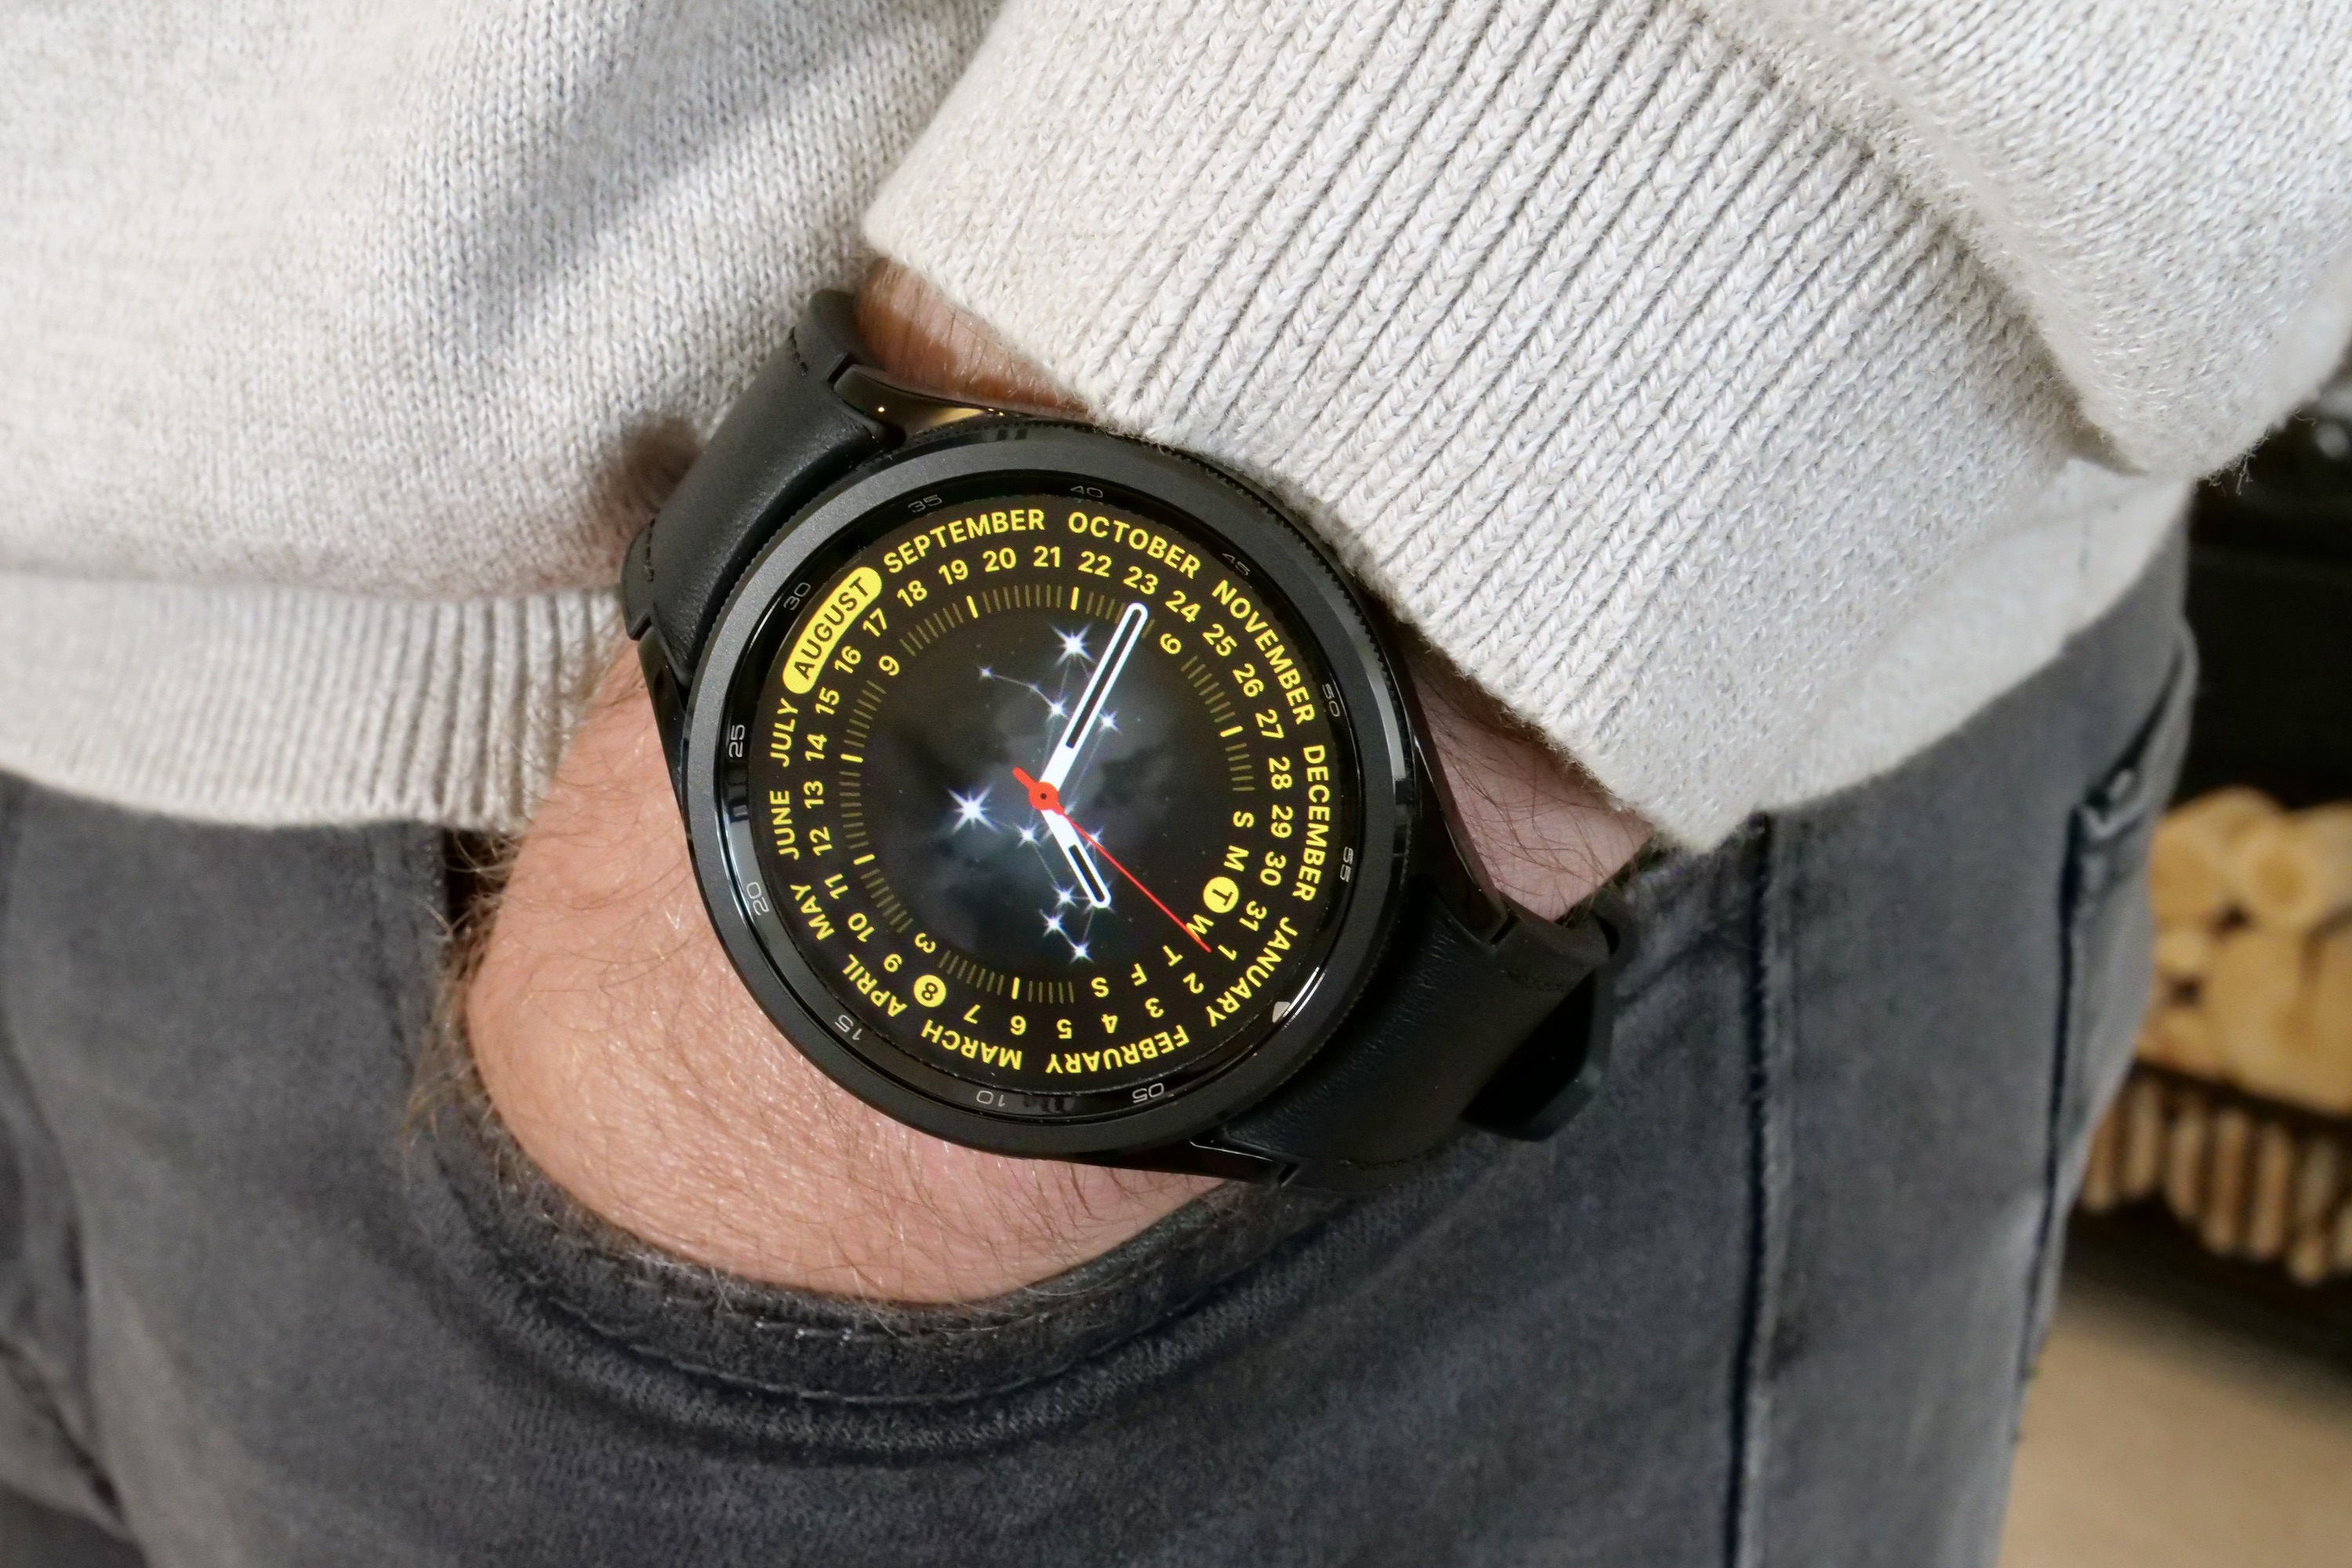 Samsung Galaxy Watch 4 Review: Samsung's Apple Watch - Reviewed